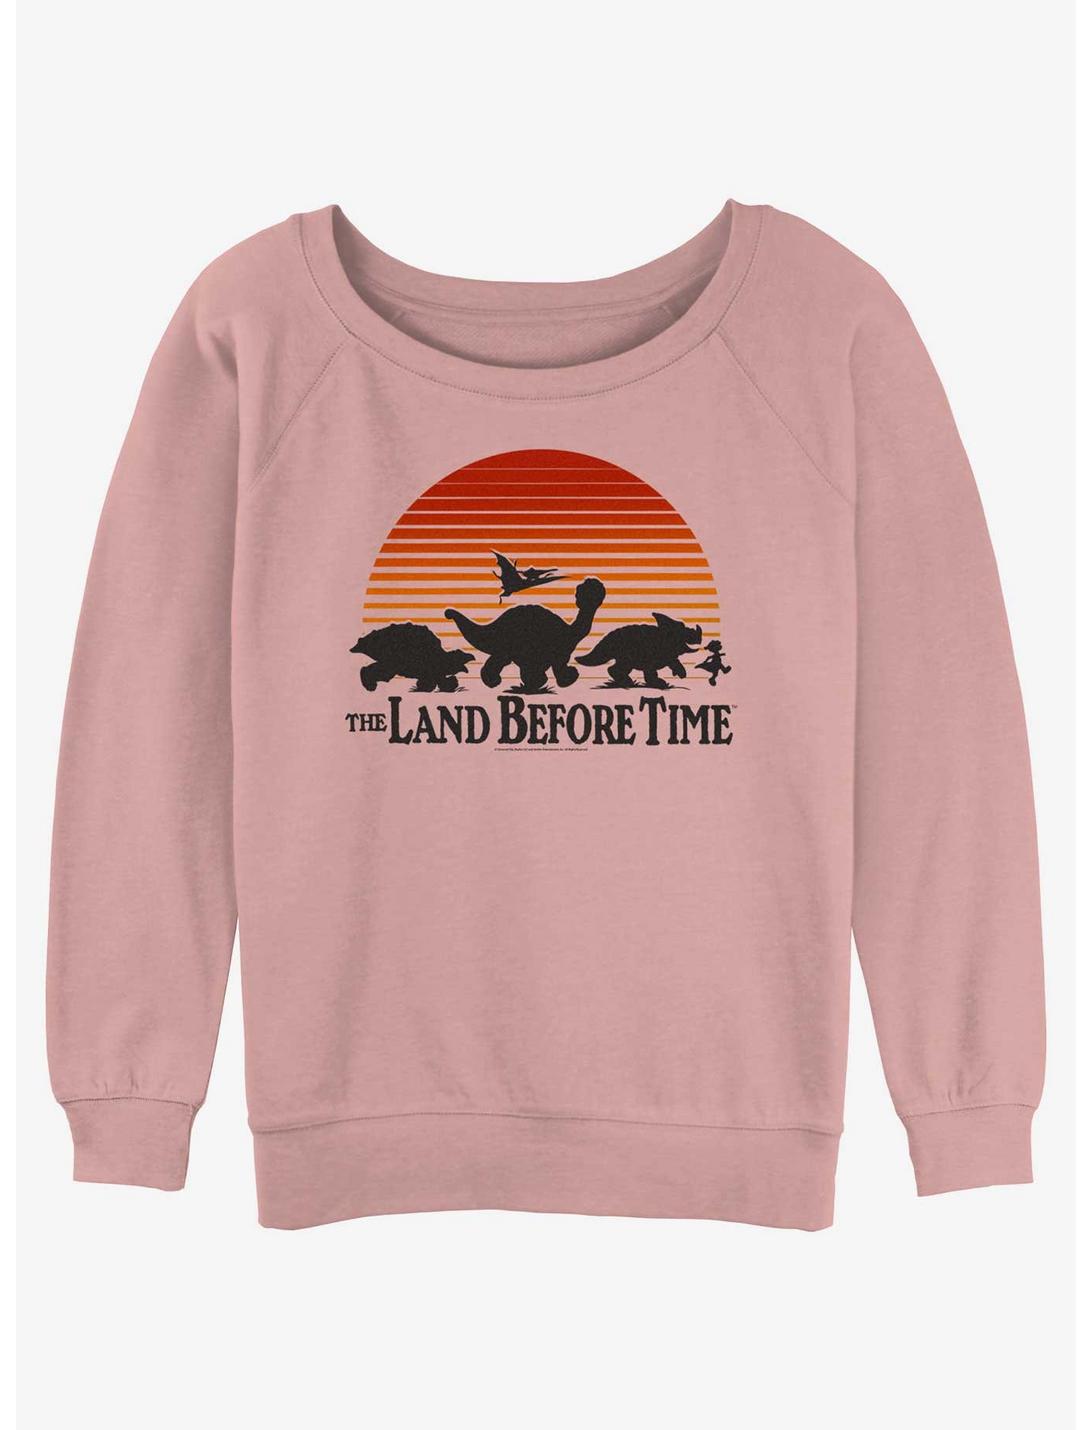 The Land Before Time Sunset Silhouette Girls Slouchy Sweatshirt, DESERTPNK, hi-res